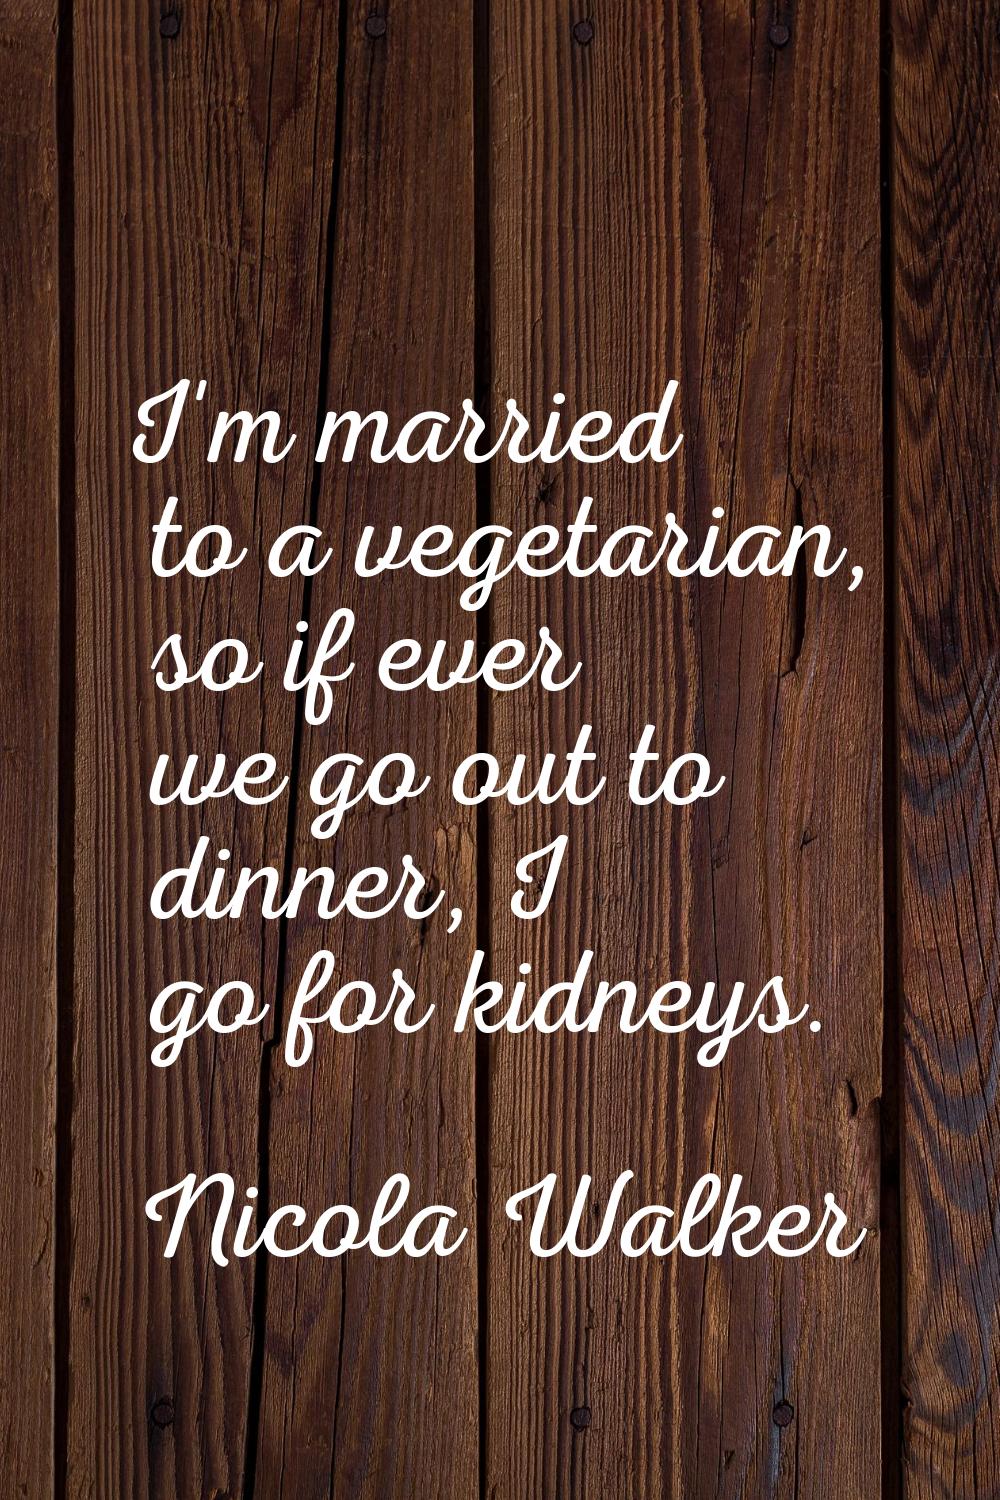 I'm married to a vegetarian, so if ever we go out to dinner, I go for kidneys.